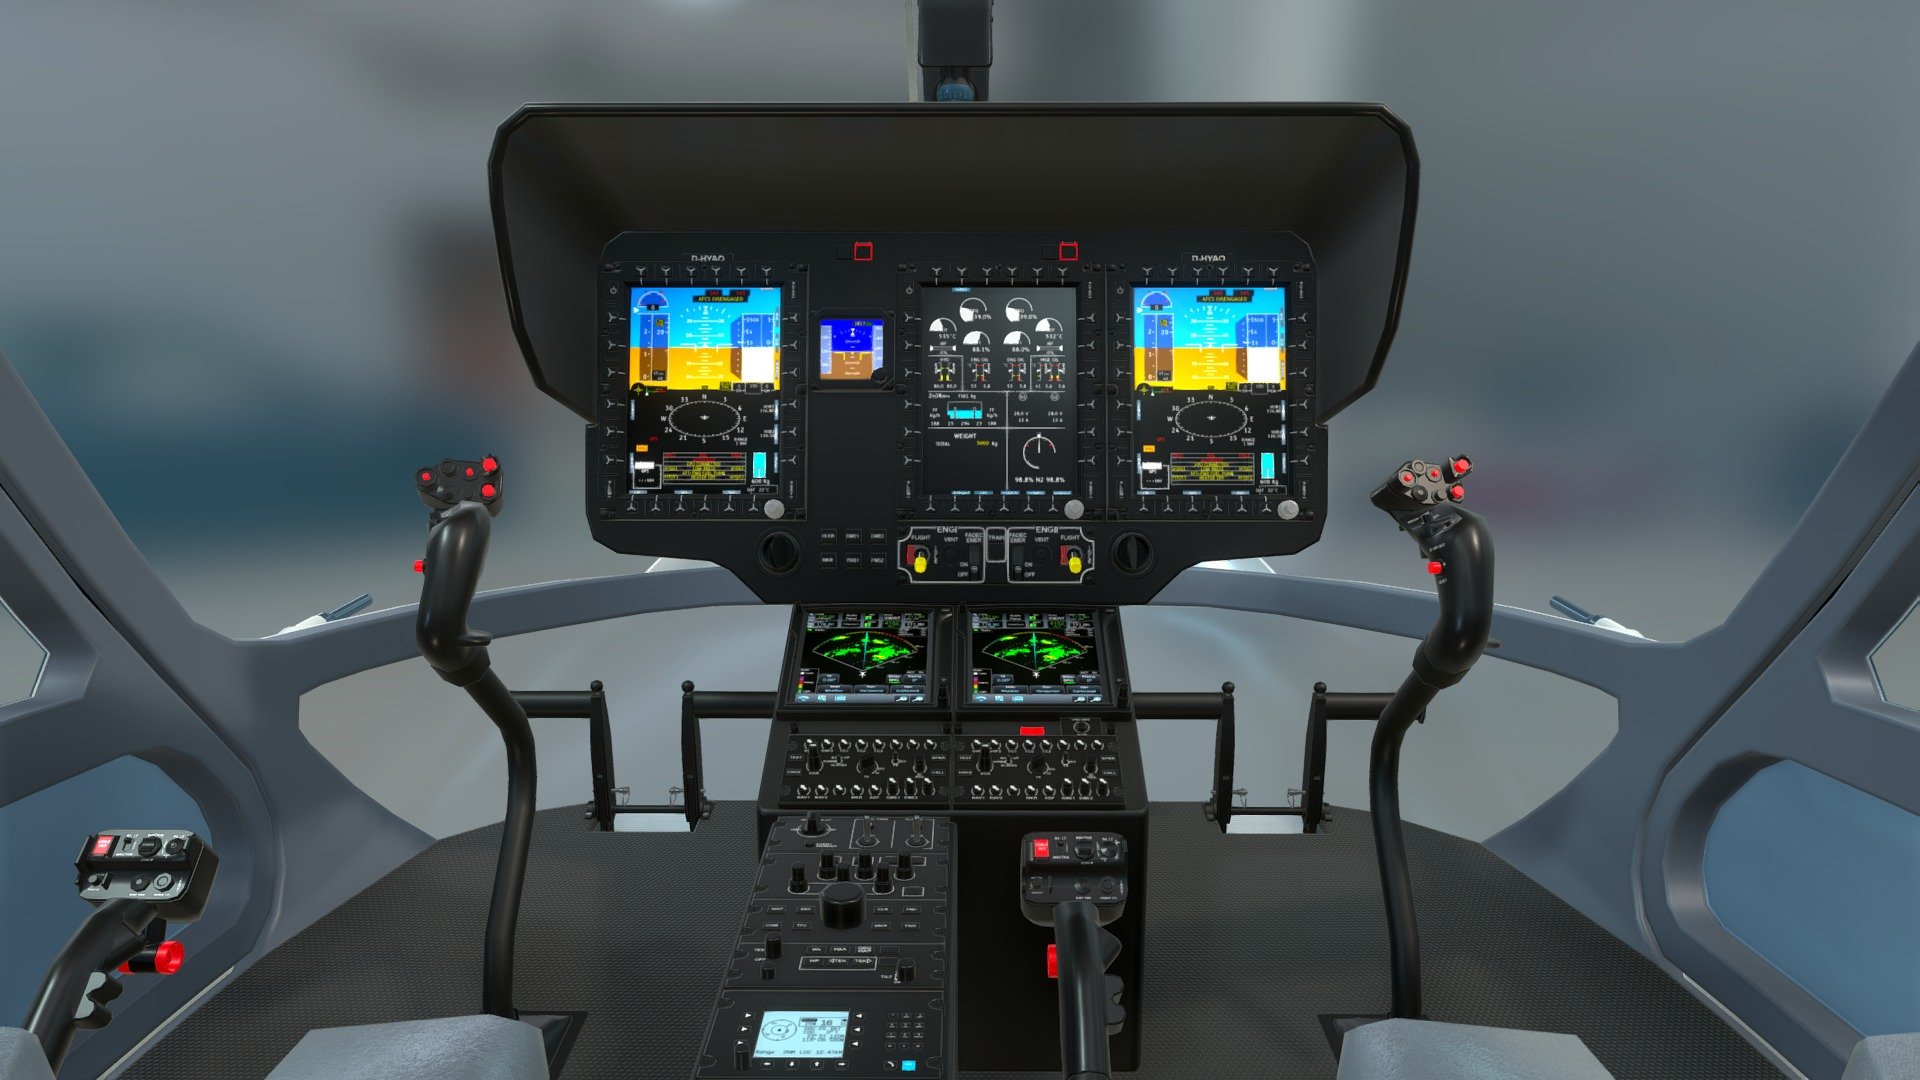 Cockpit view of an Airbus H145 Emergency helicopter.

Zoom out to reveal the entire helicopter.

Published by 3ds Max - Airbus H145 Cockpit - 3D model by Padpilot 3d model